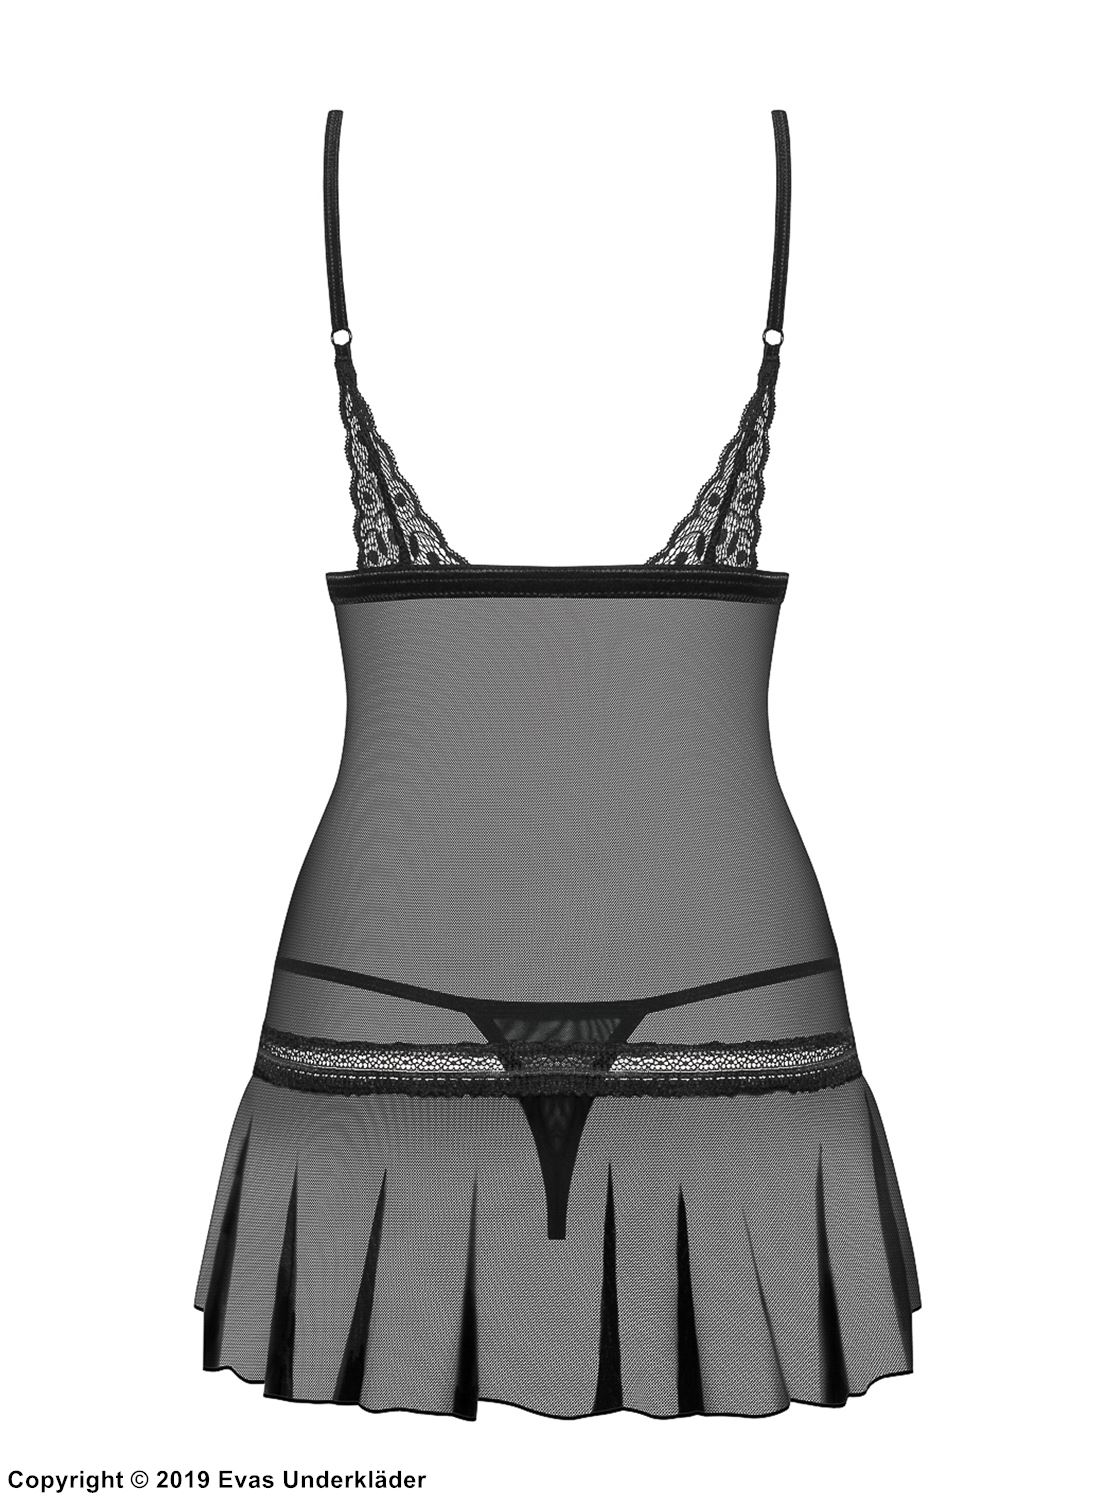 Skin-tight chemise, see-through mesh, ruffles, lace cups